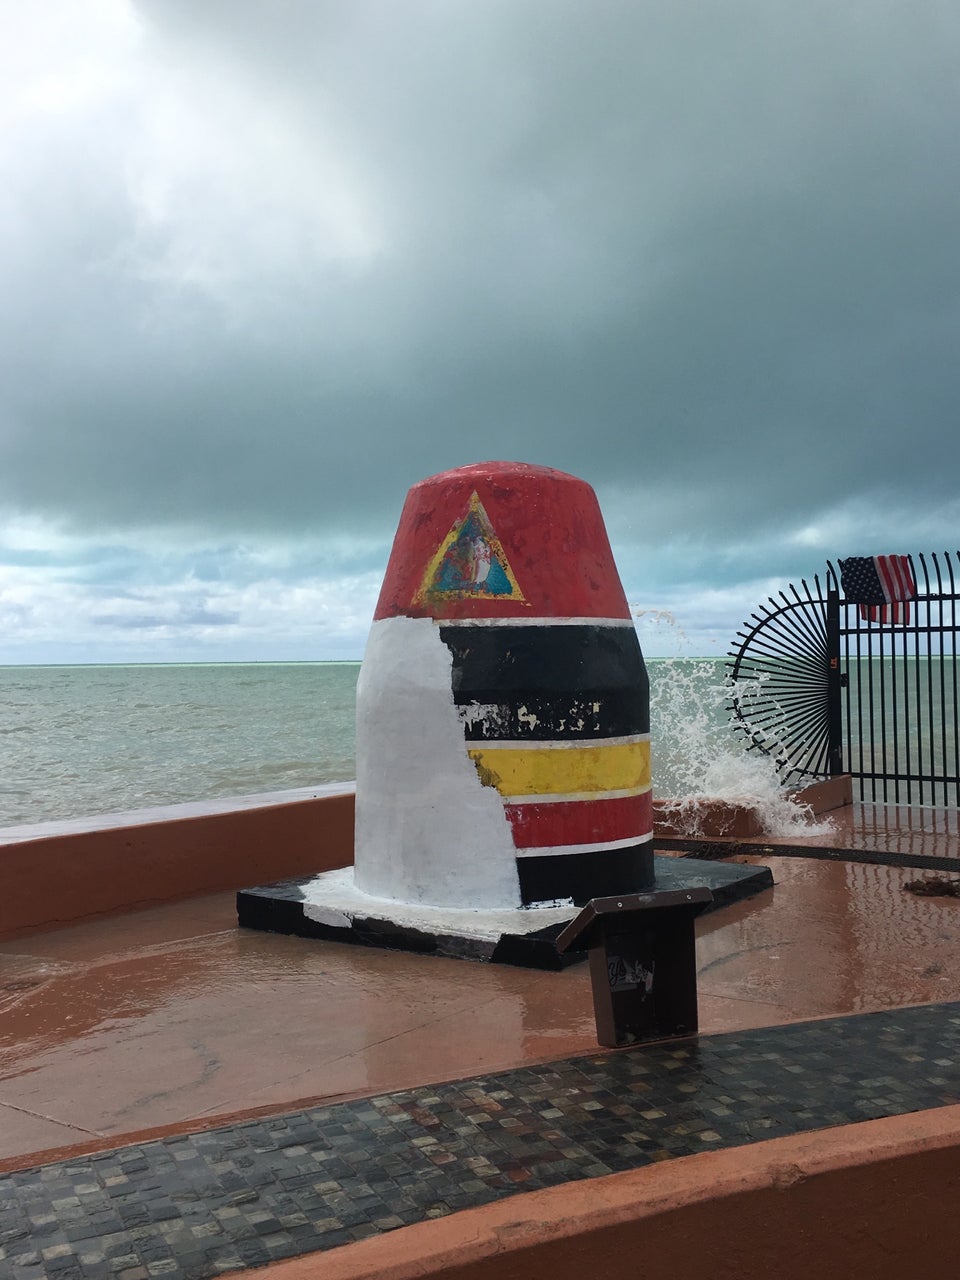 Photo of Southernmost Point USA